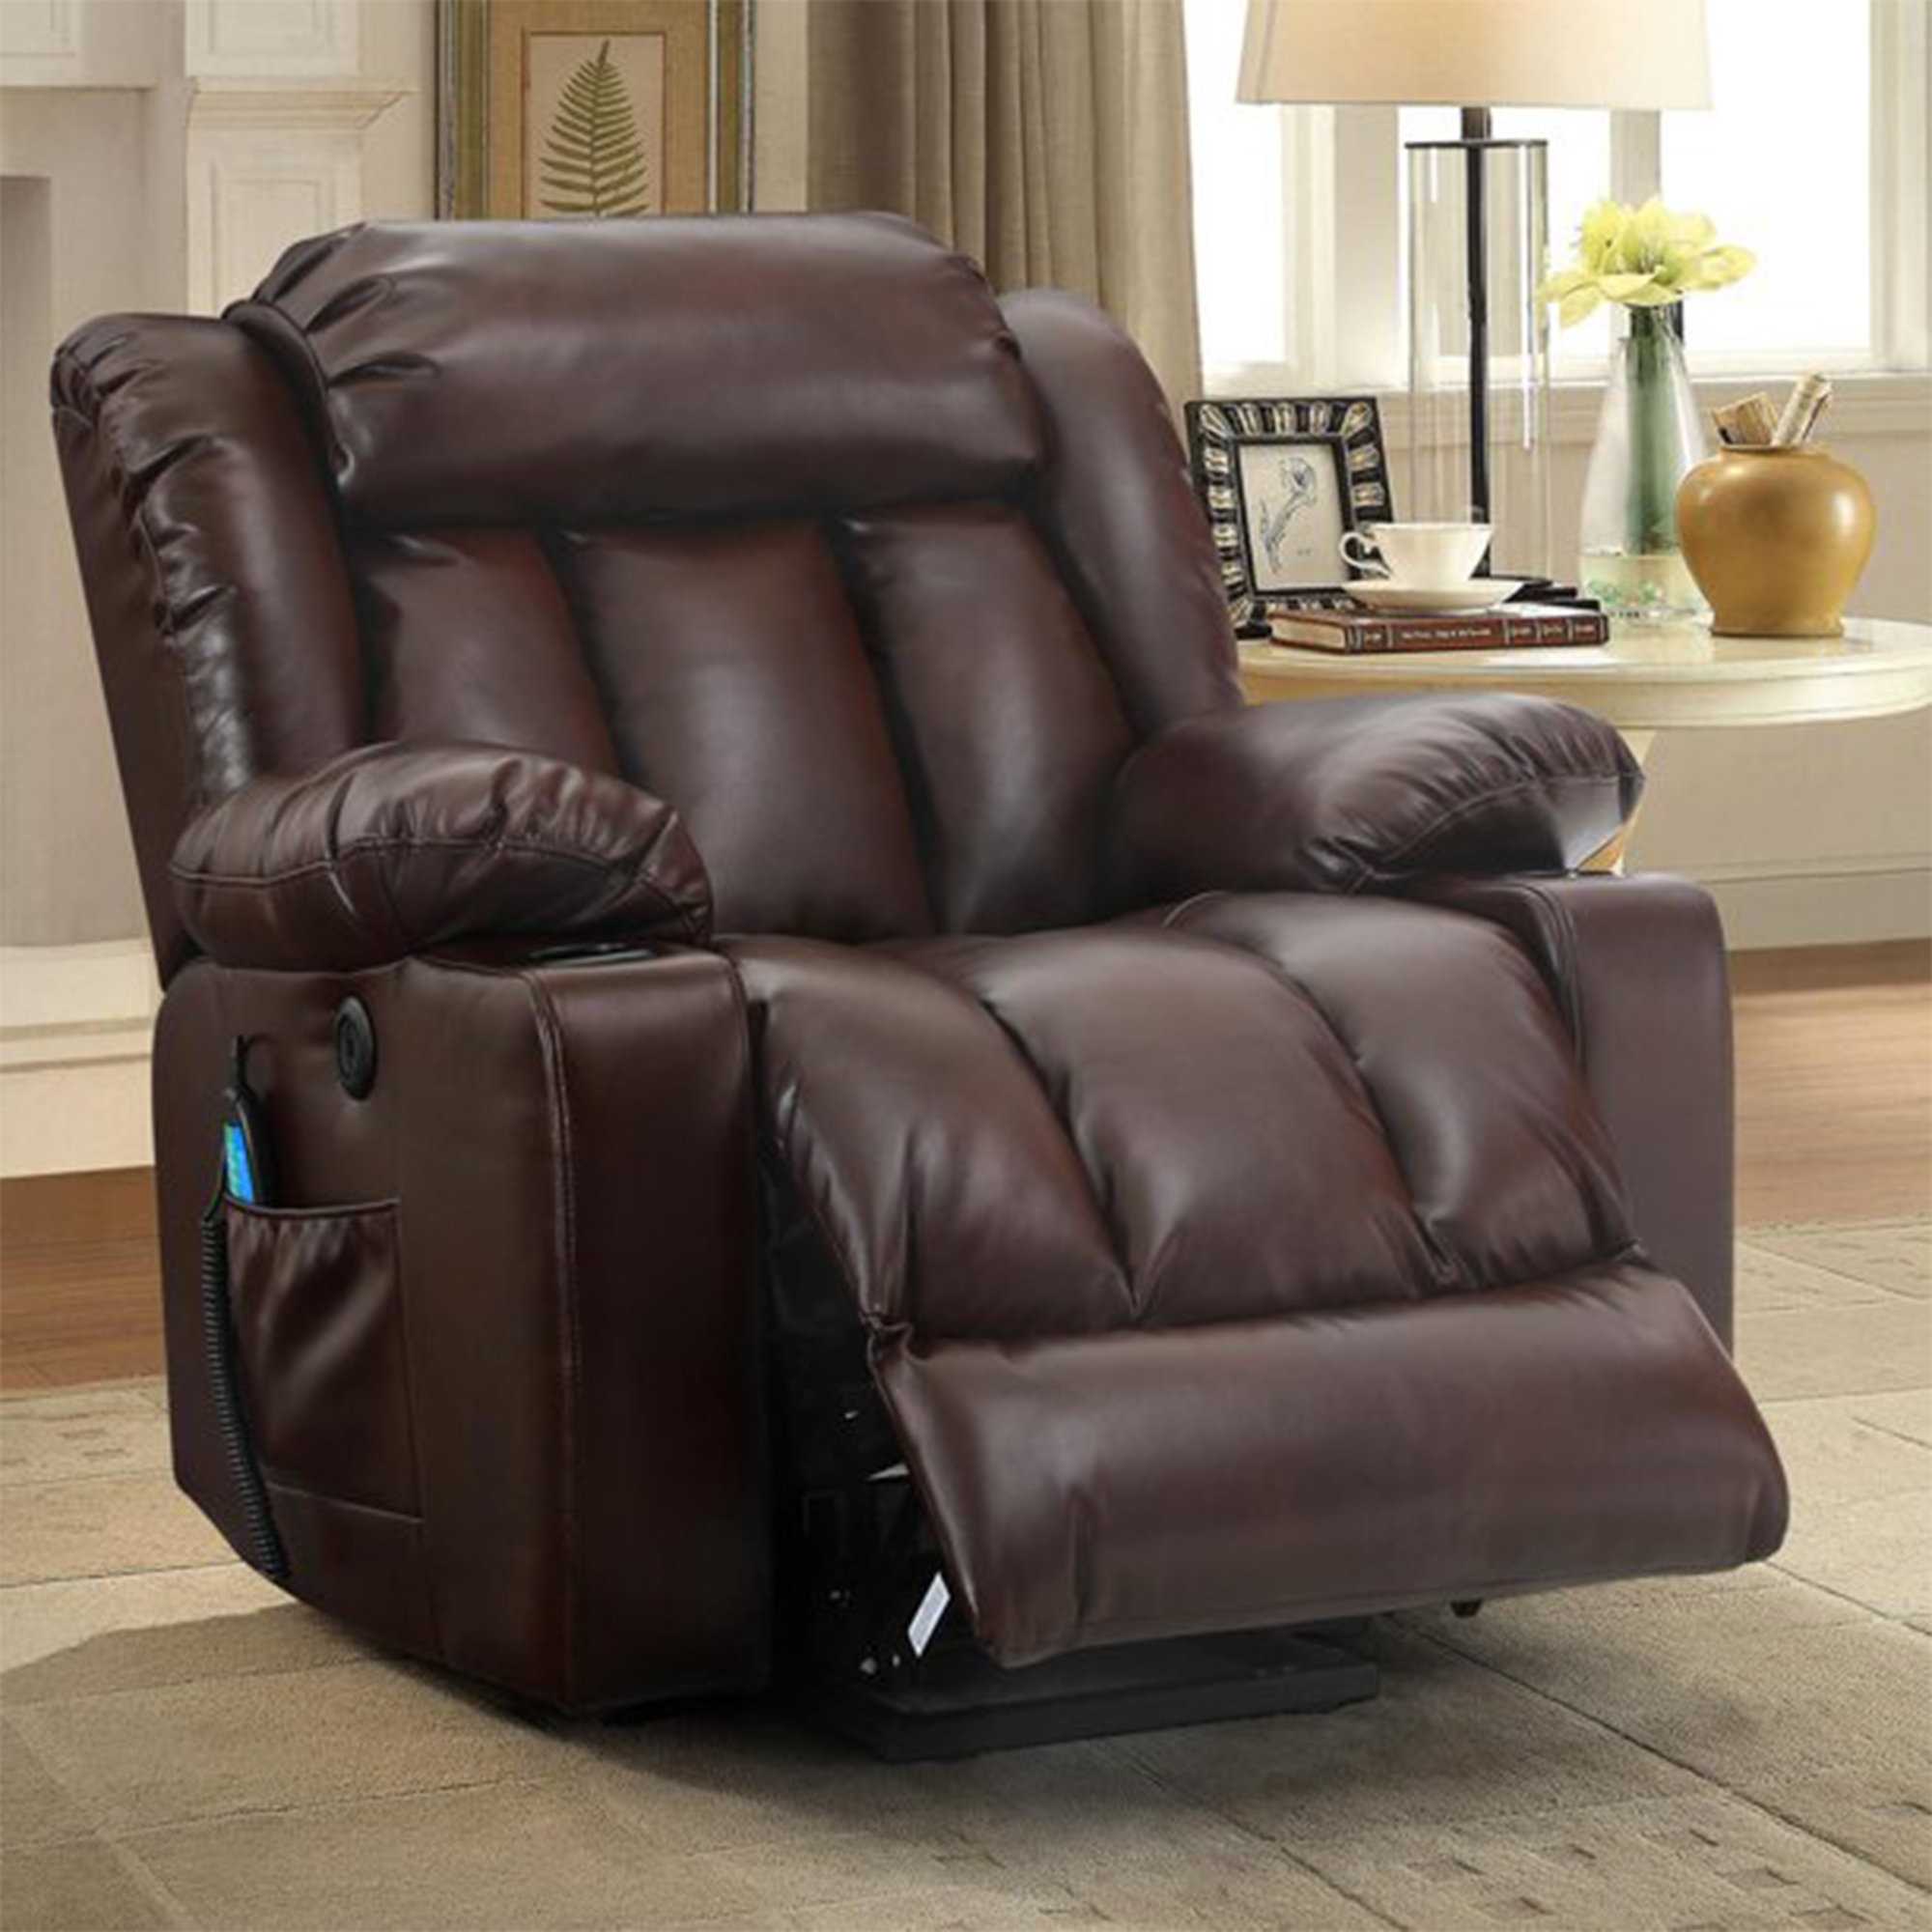 Latitude Run Large Power Lift Recliner Chair with Massage and Heat